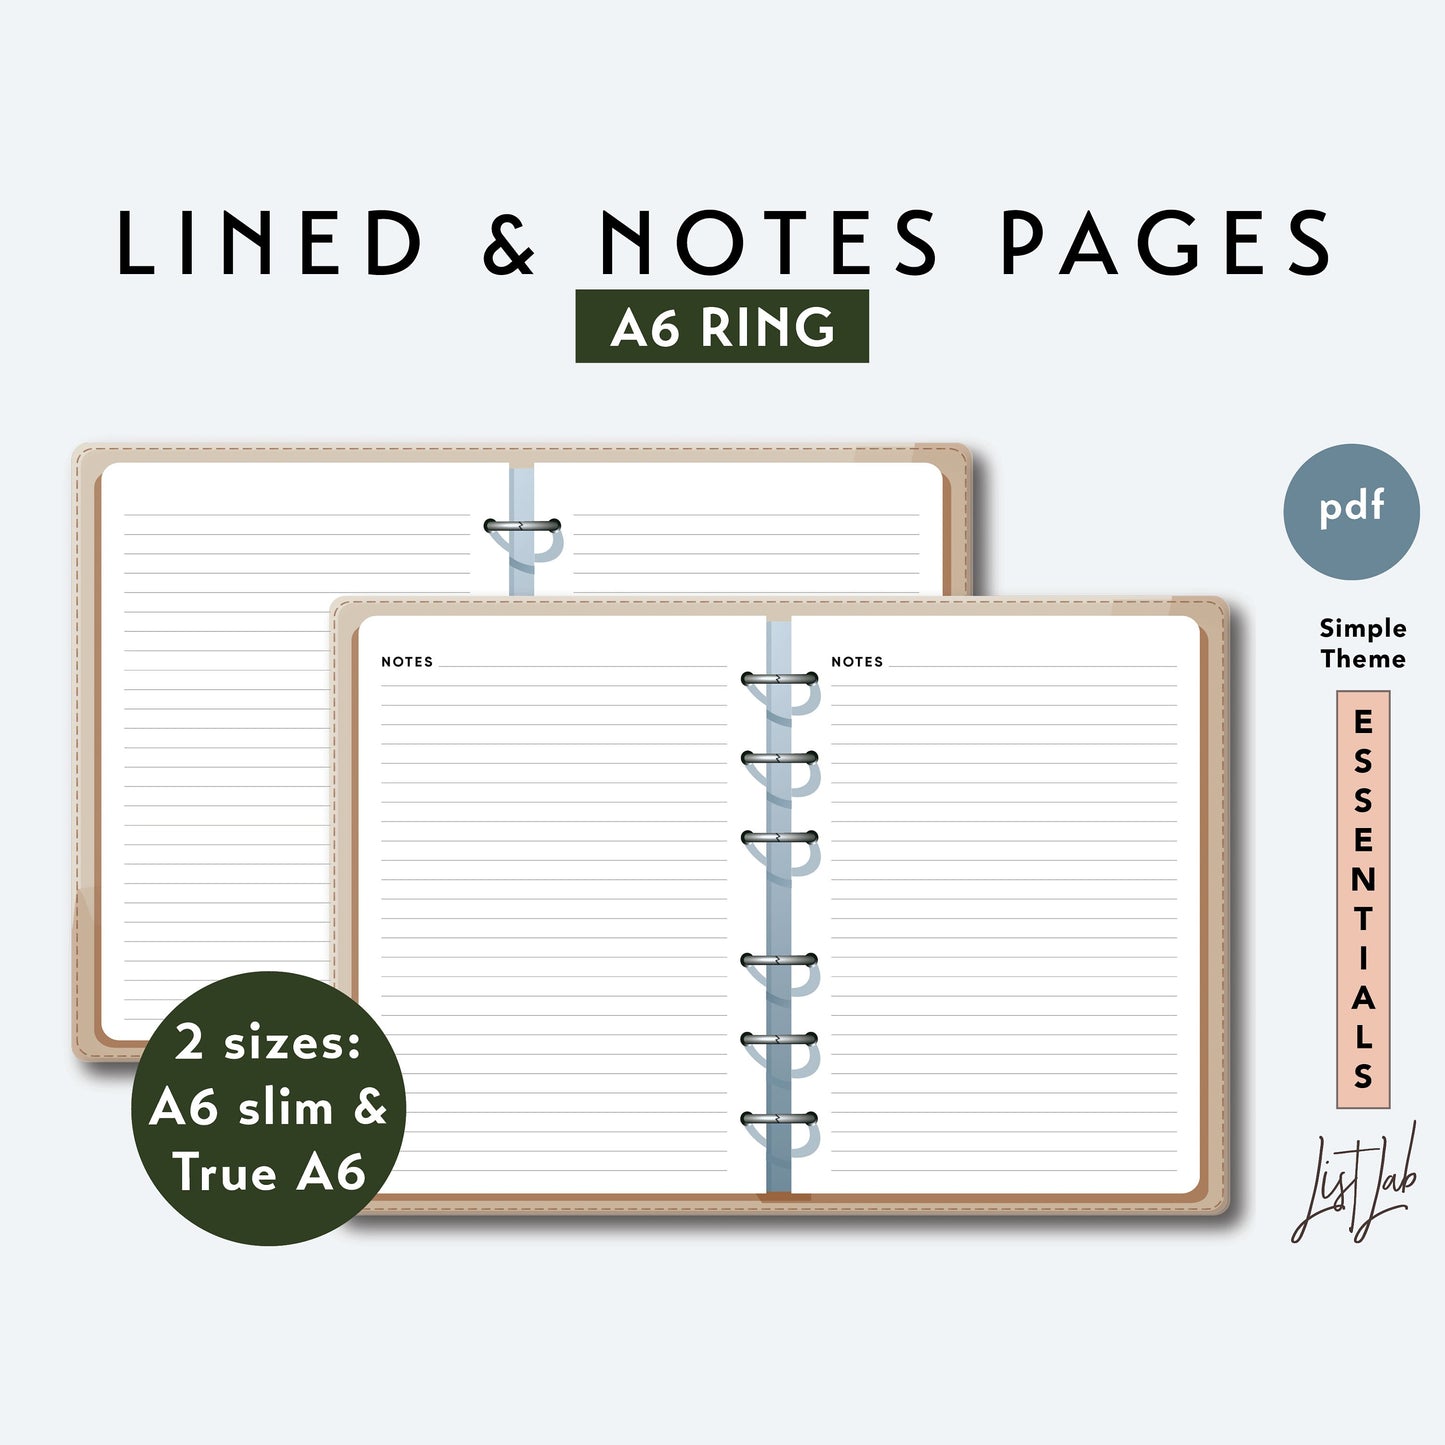 A6 Ring NOTES & LINED PAGES Printable Set